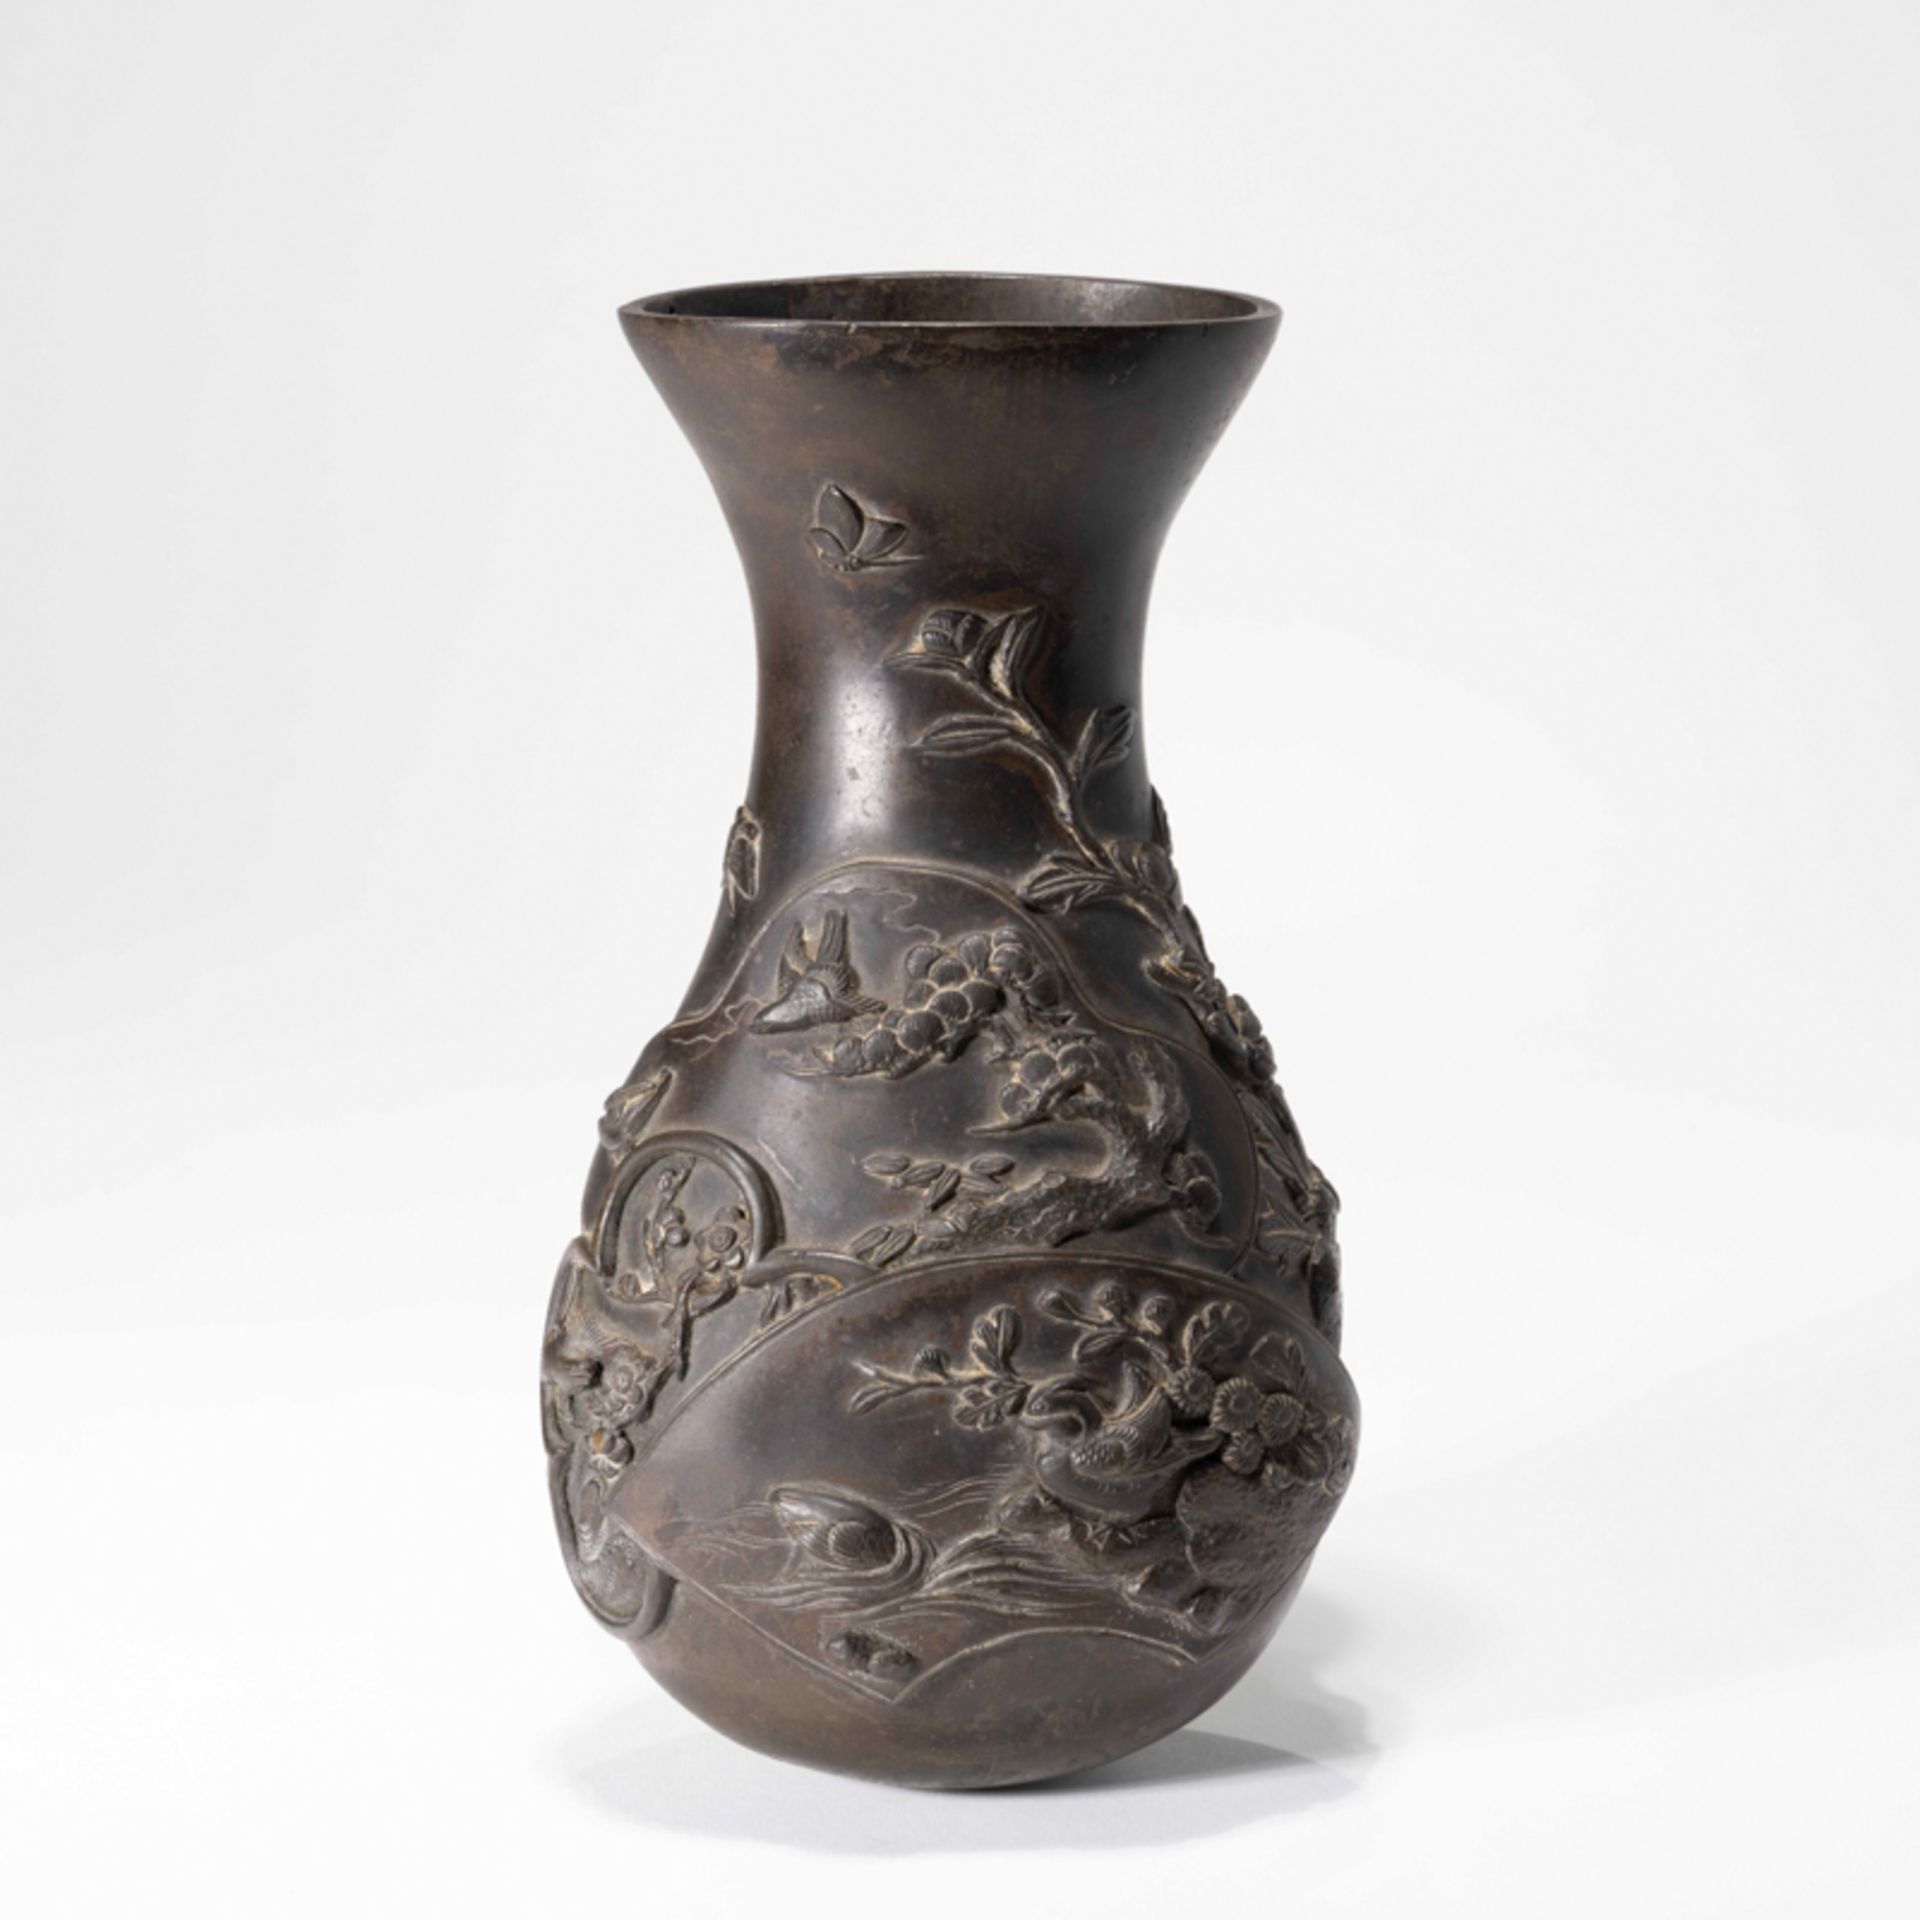 A CHINESE BRONZE 'BIRDS AND FLOWERS' WALL VASE